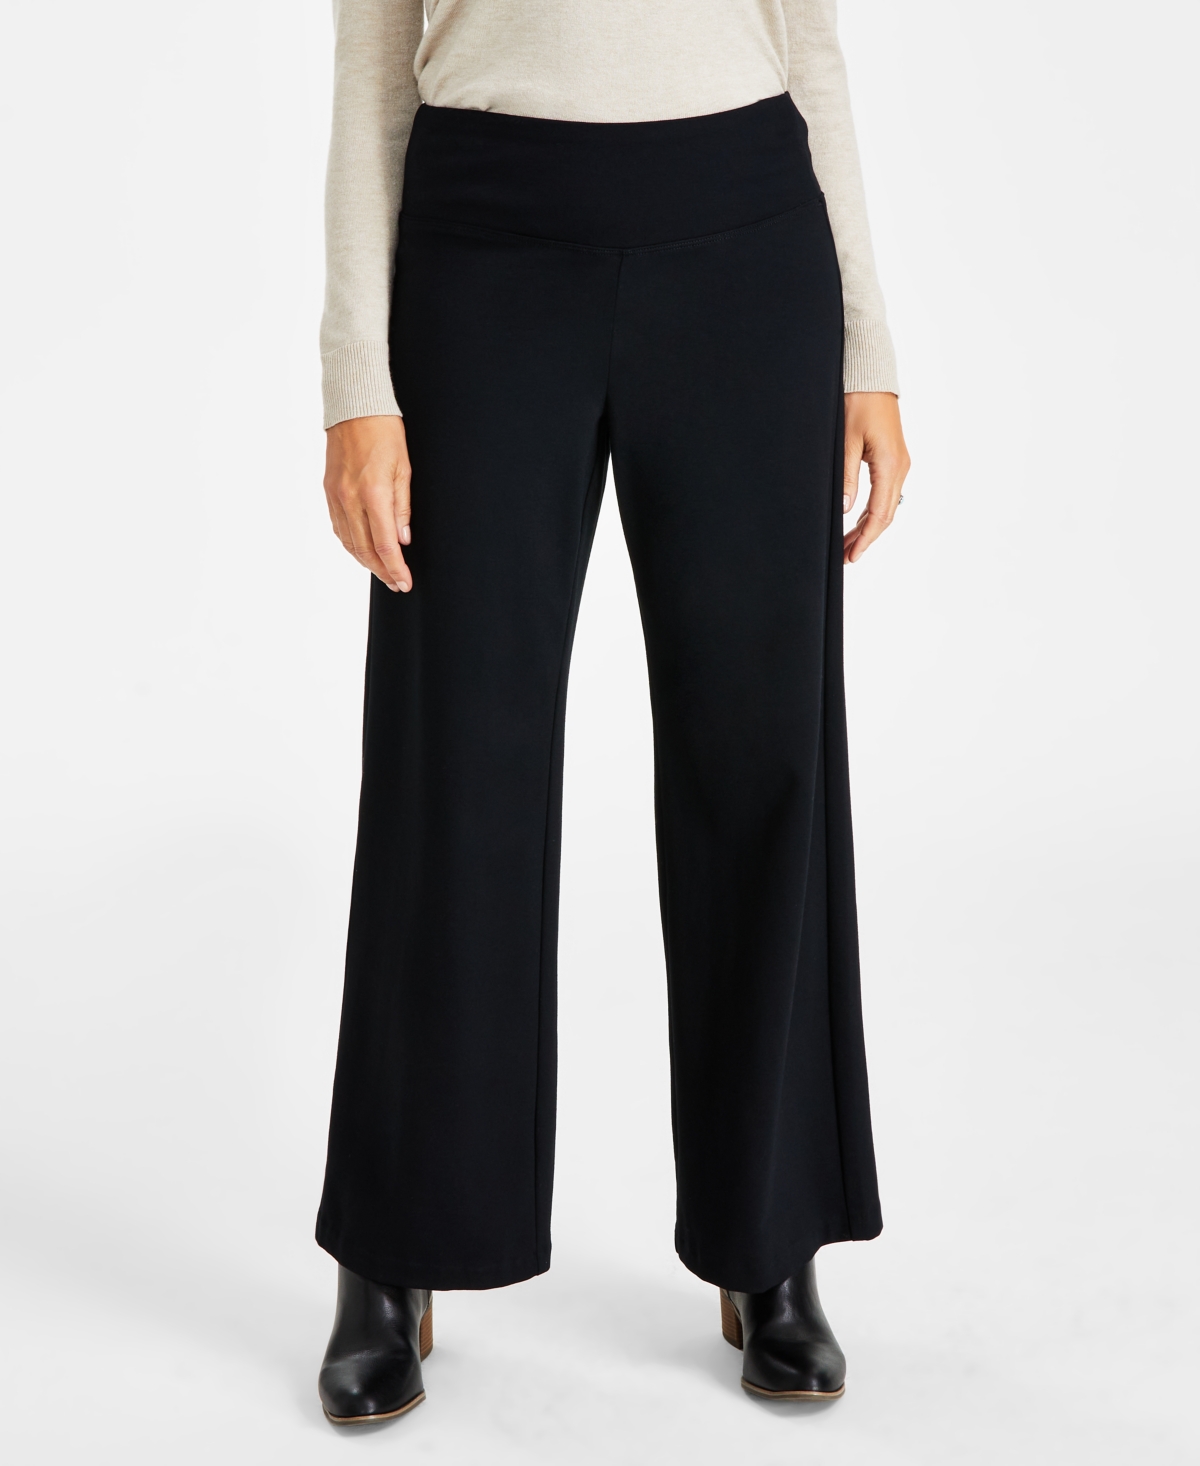 Petite Wide-Leg Pull-On Pants, Created for Macy's - Deep Black